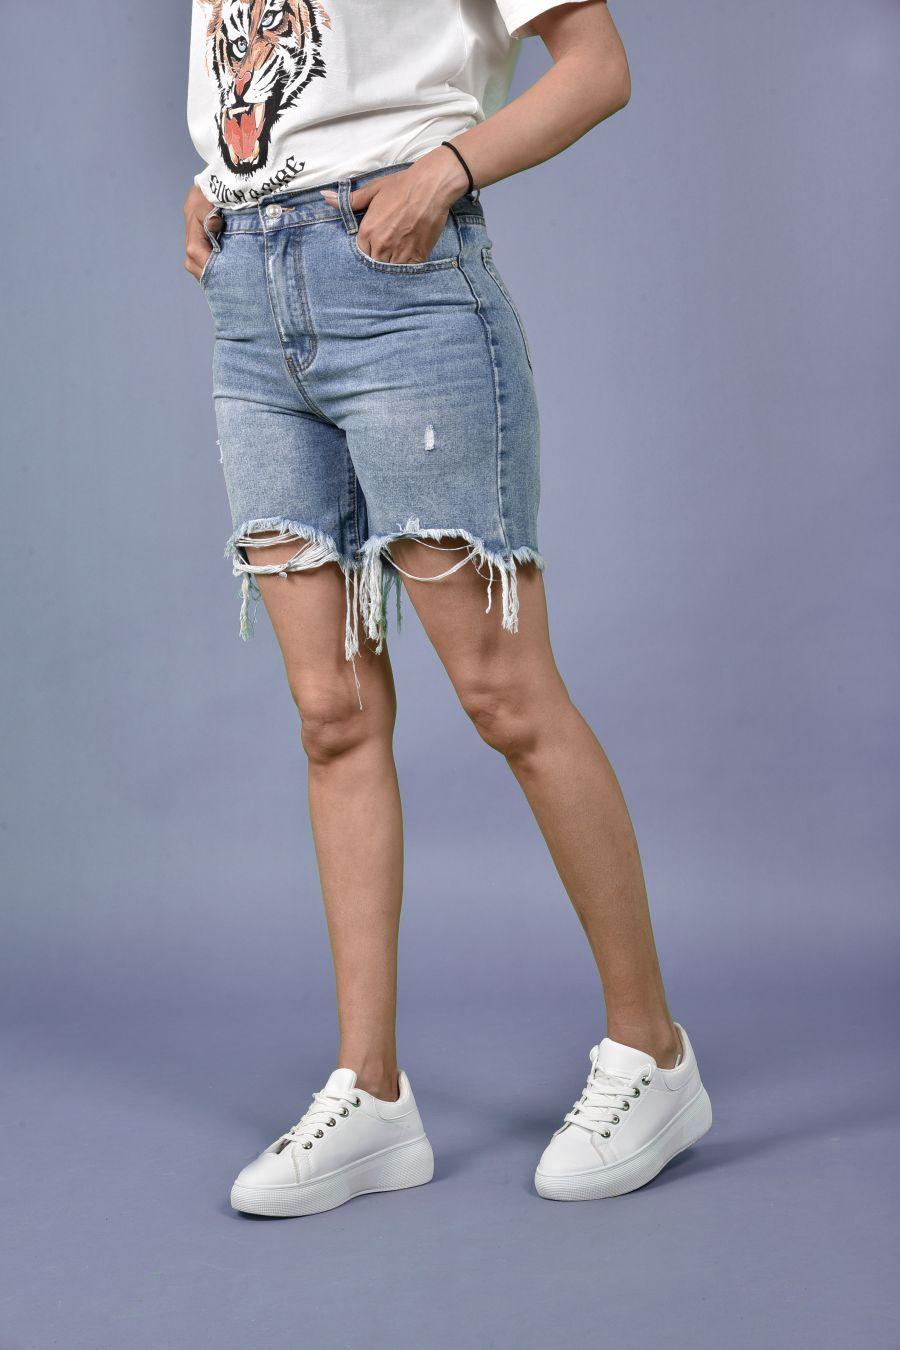 Jean shorts with distressed details